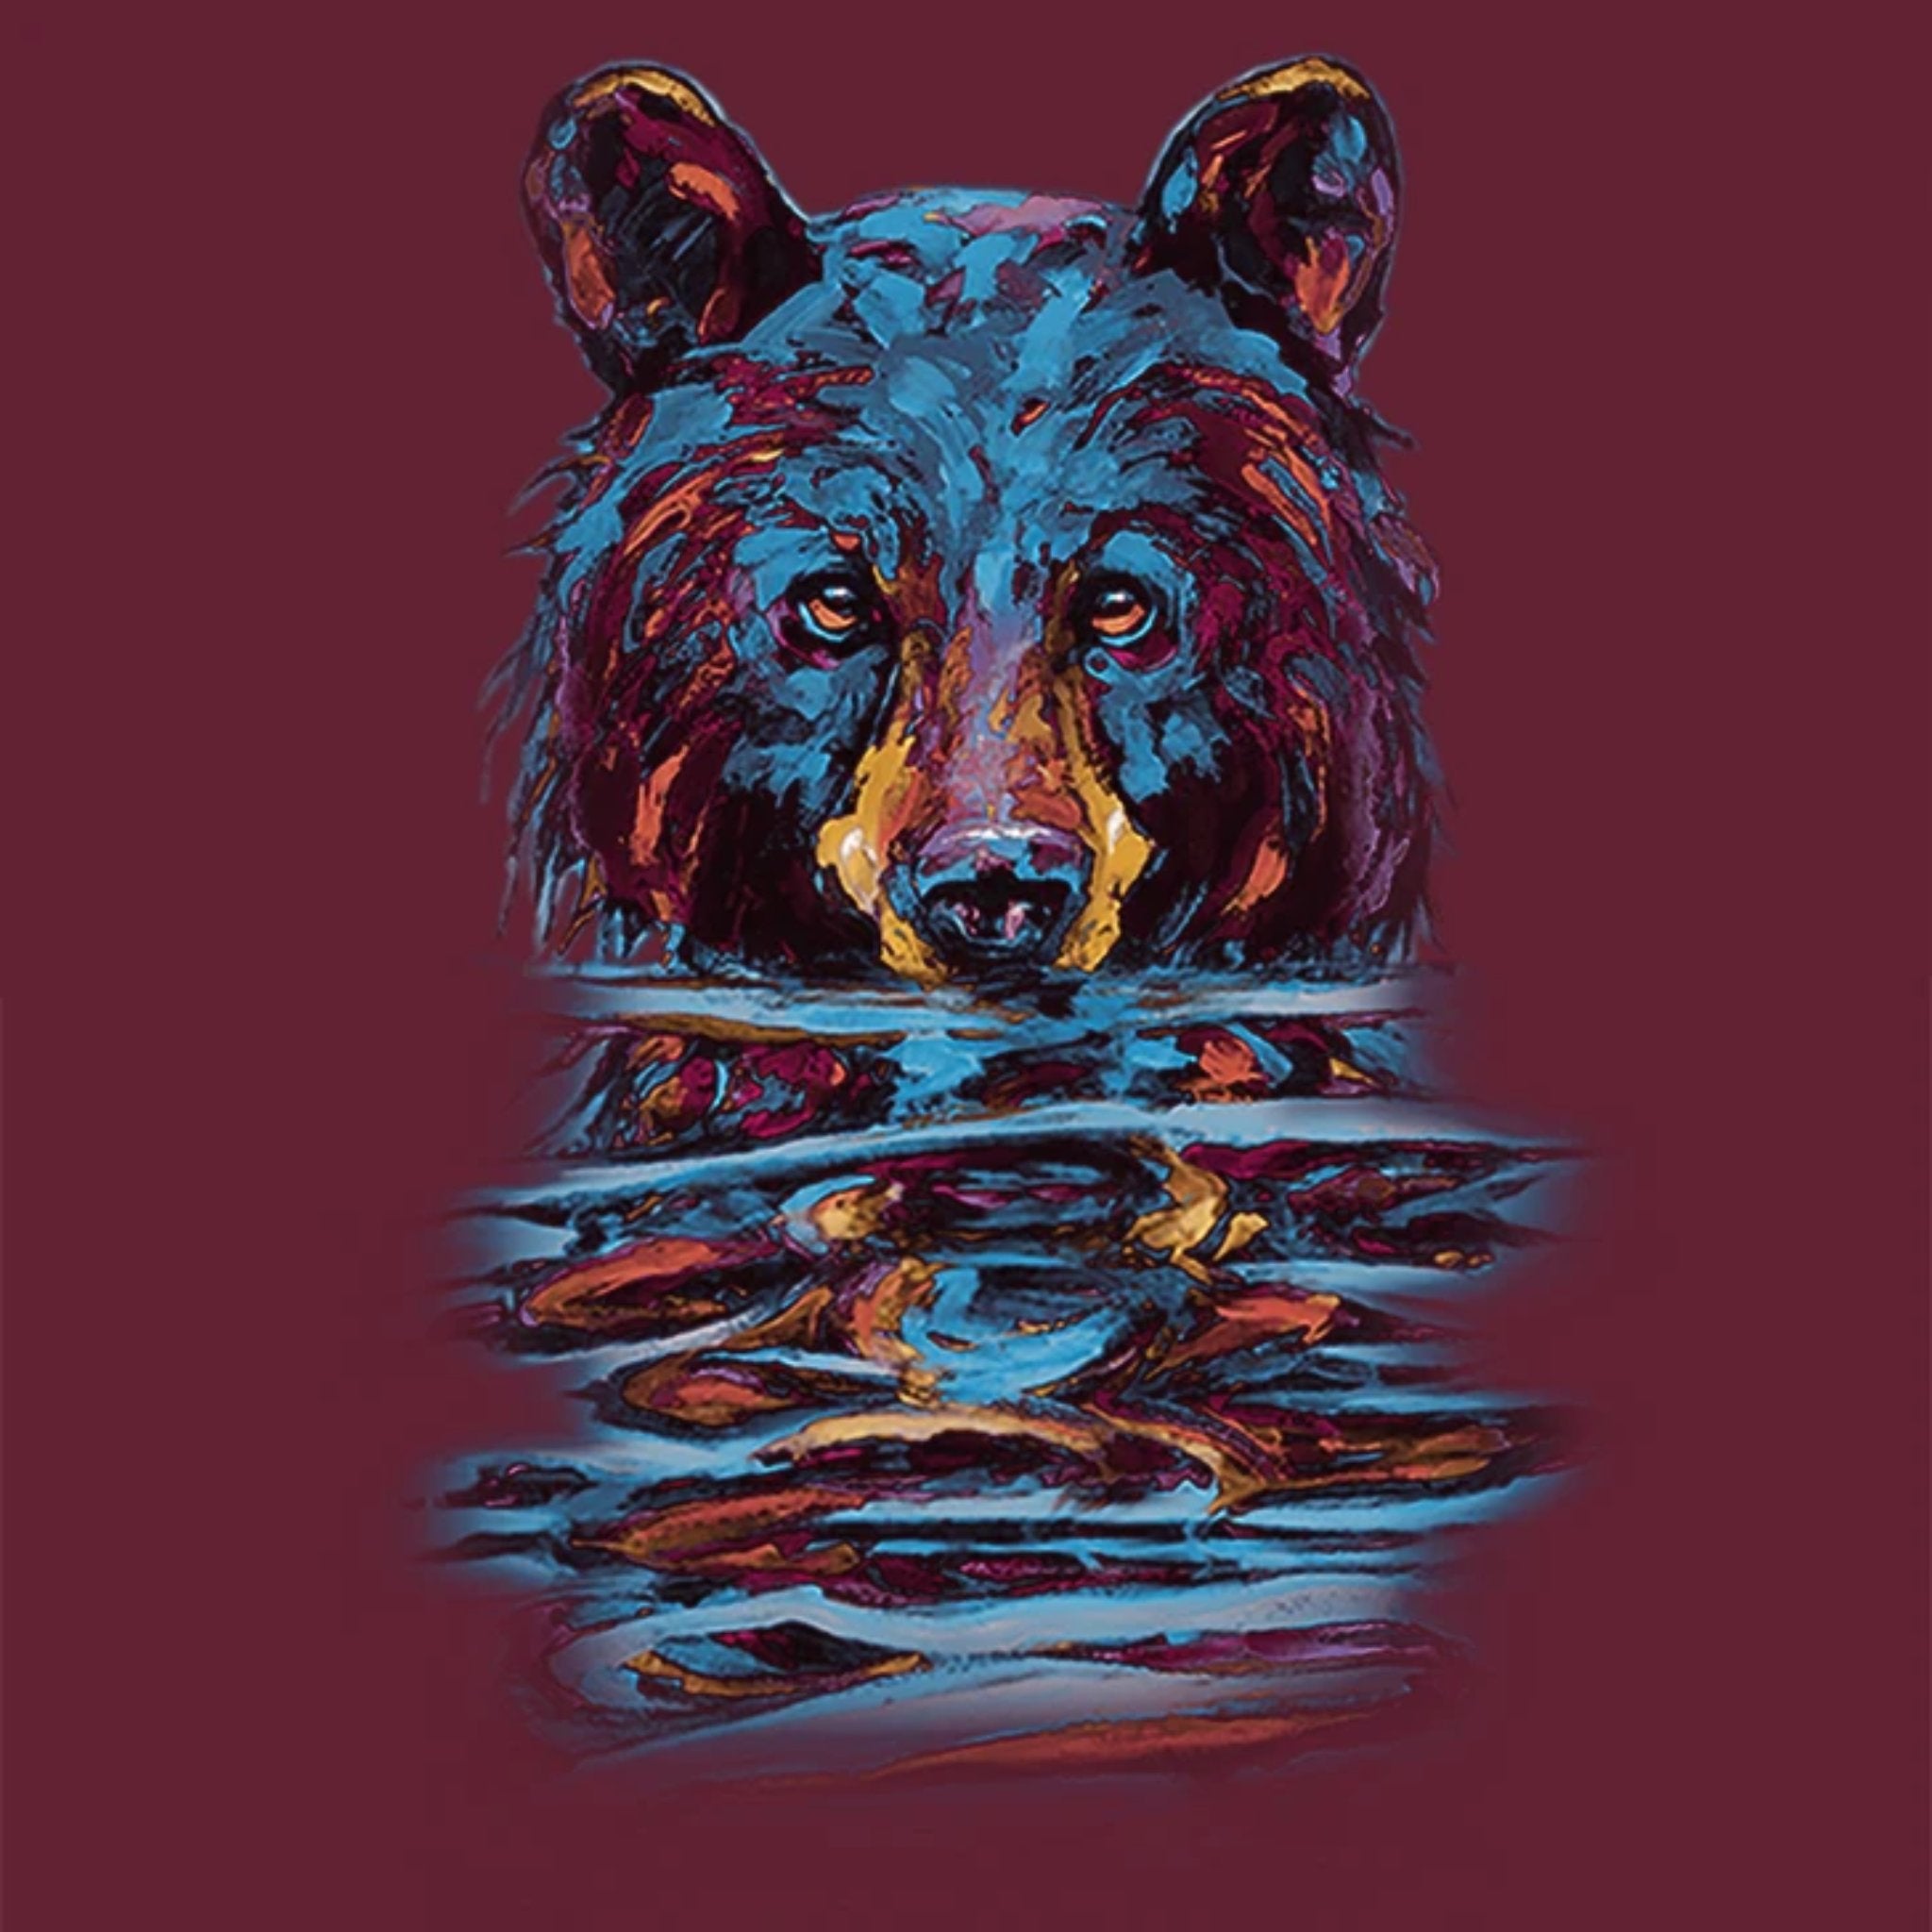 Very Wet Bear by Kari Lehr - painting of a colorful black bear emerging from water